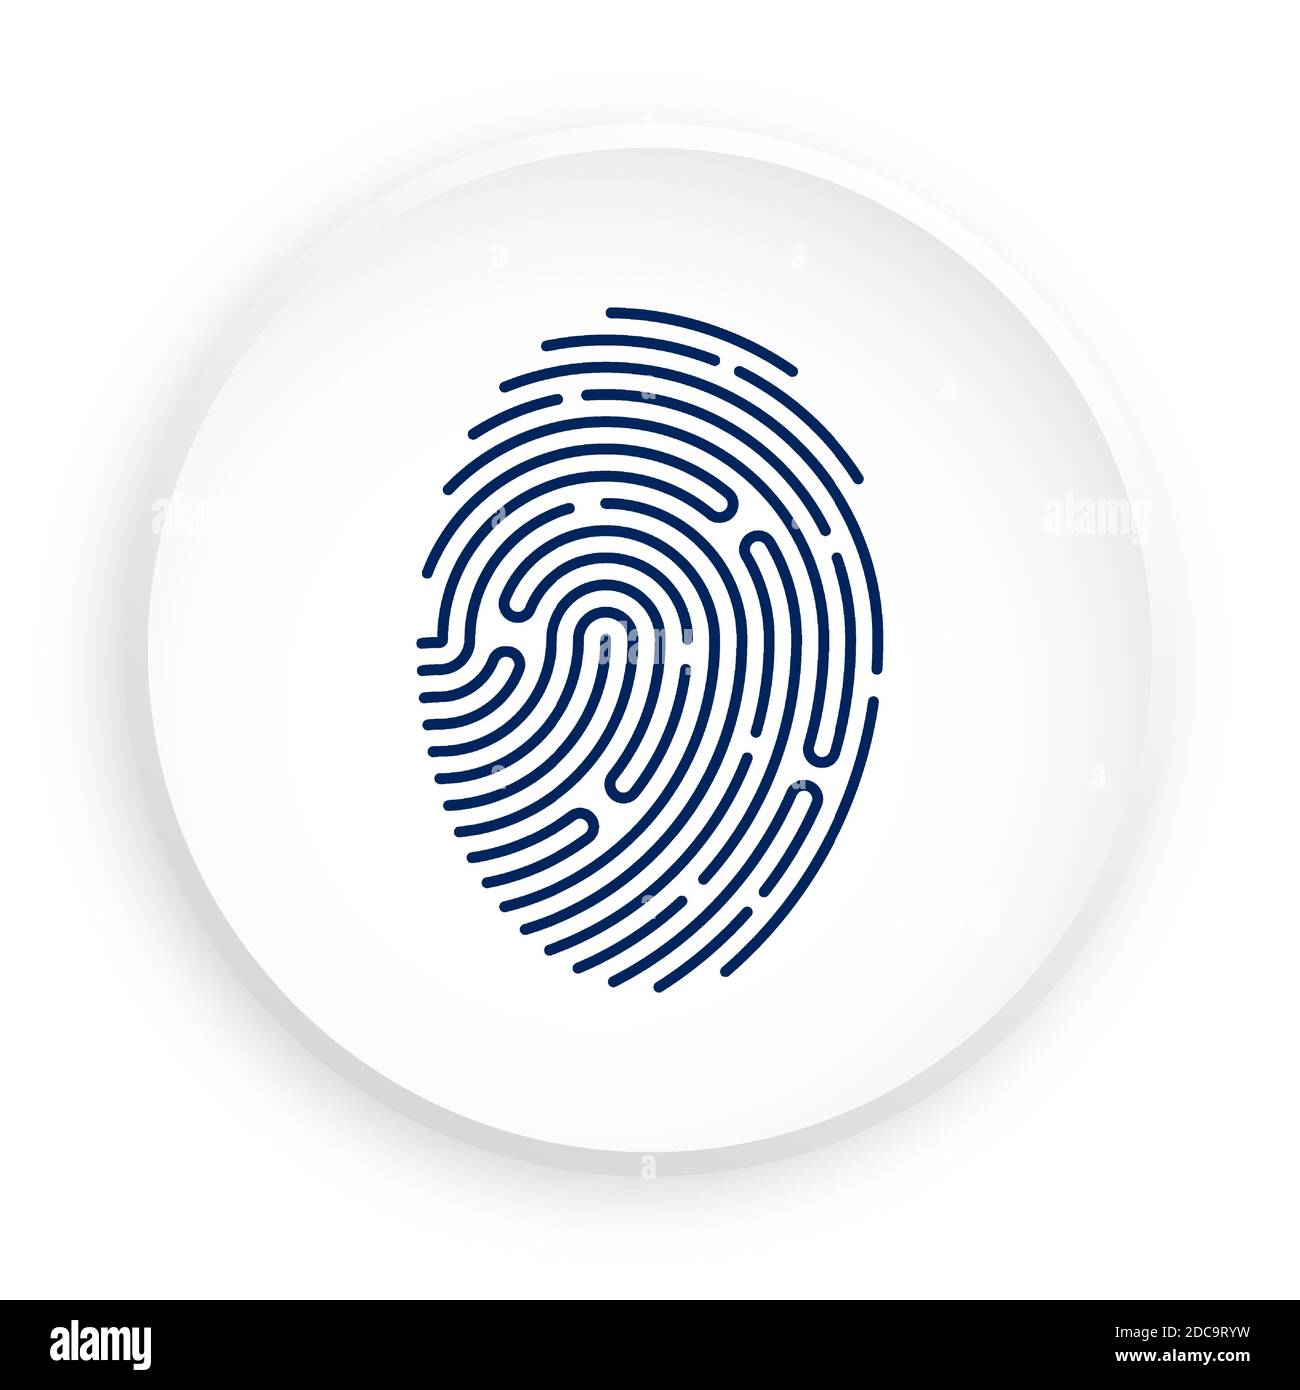 person digital fingerprint icon in neomorphism style on white background for mobile identification applications. Biometric identification of human dat Stock Vector